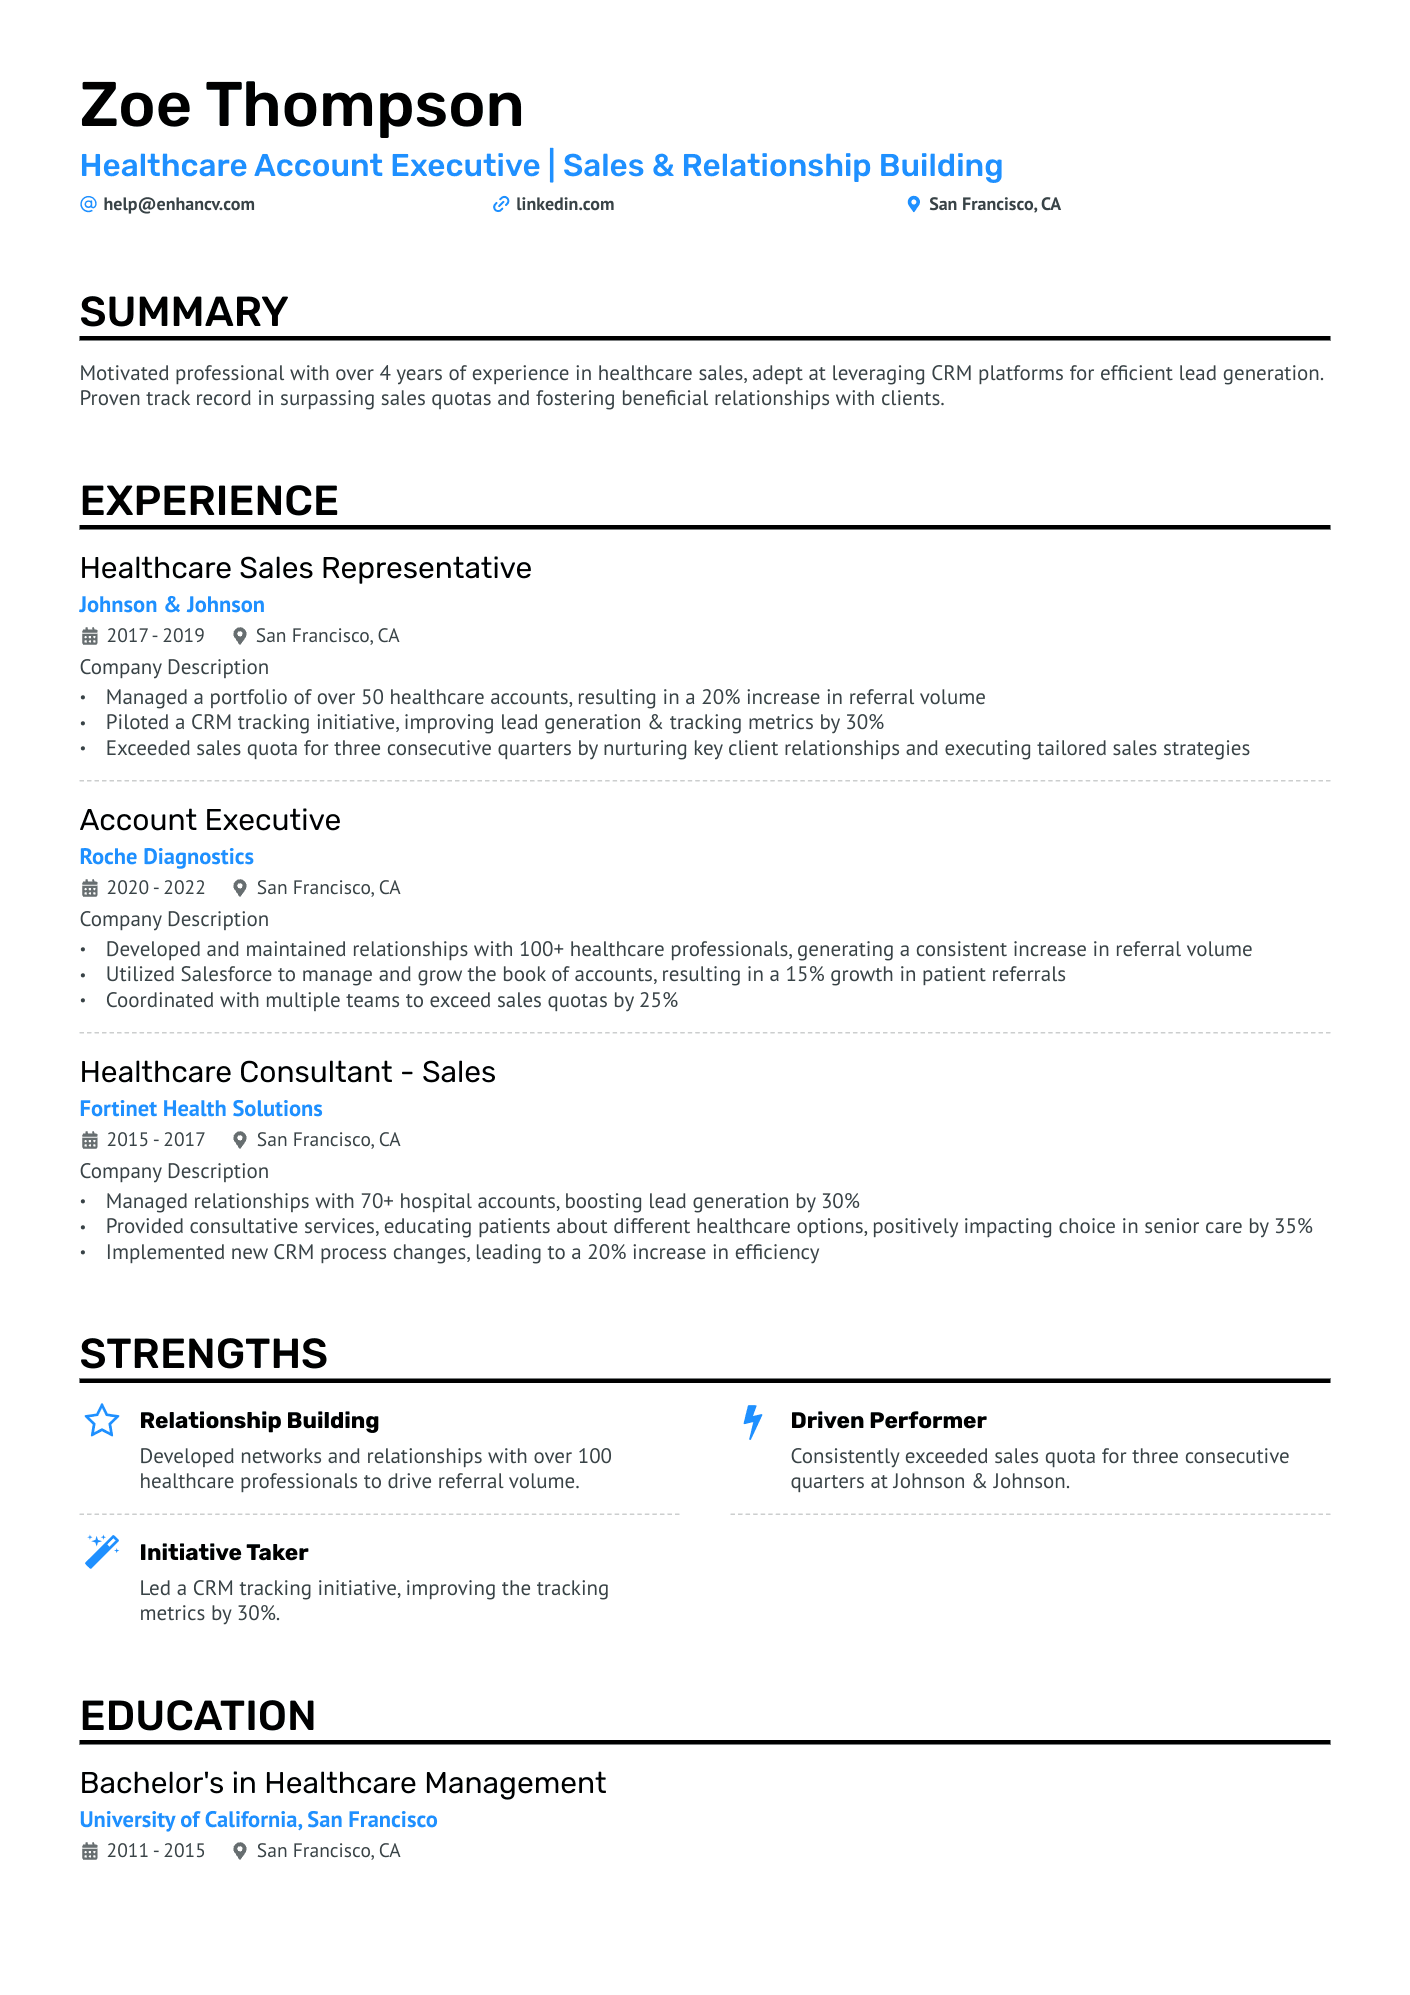 description for stay at home mom on resume